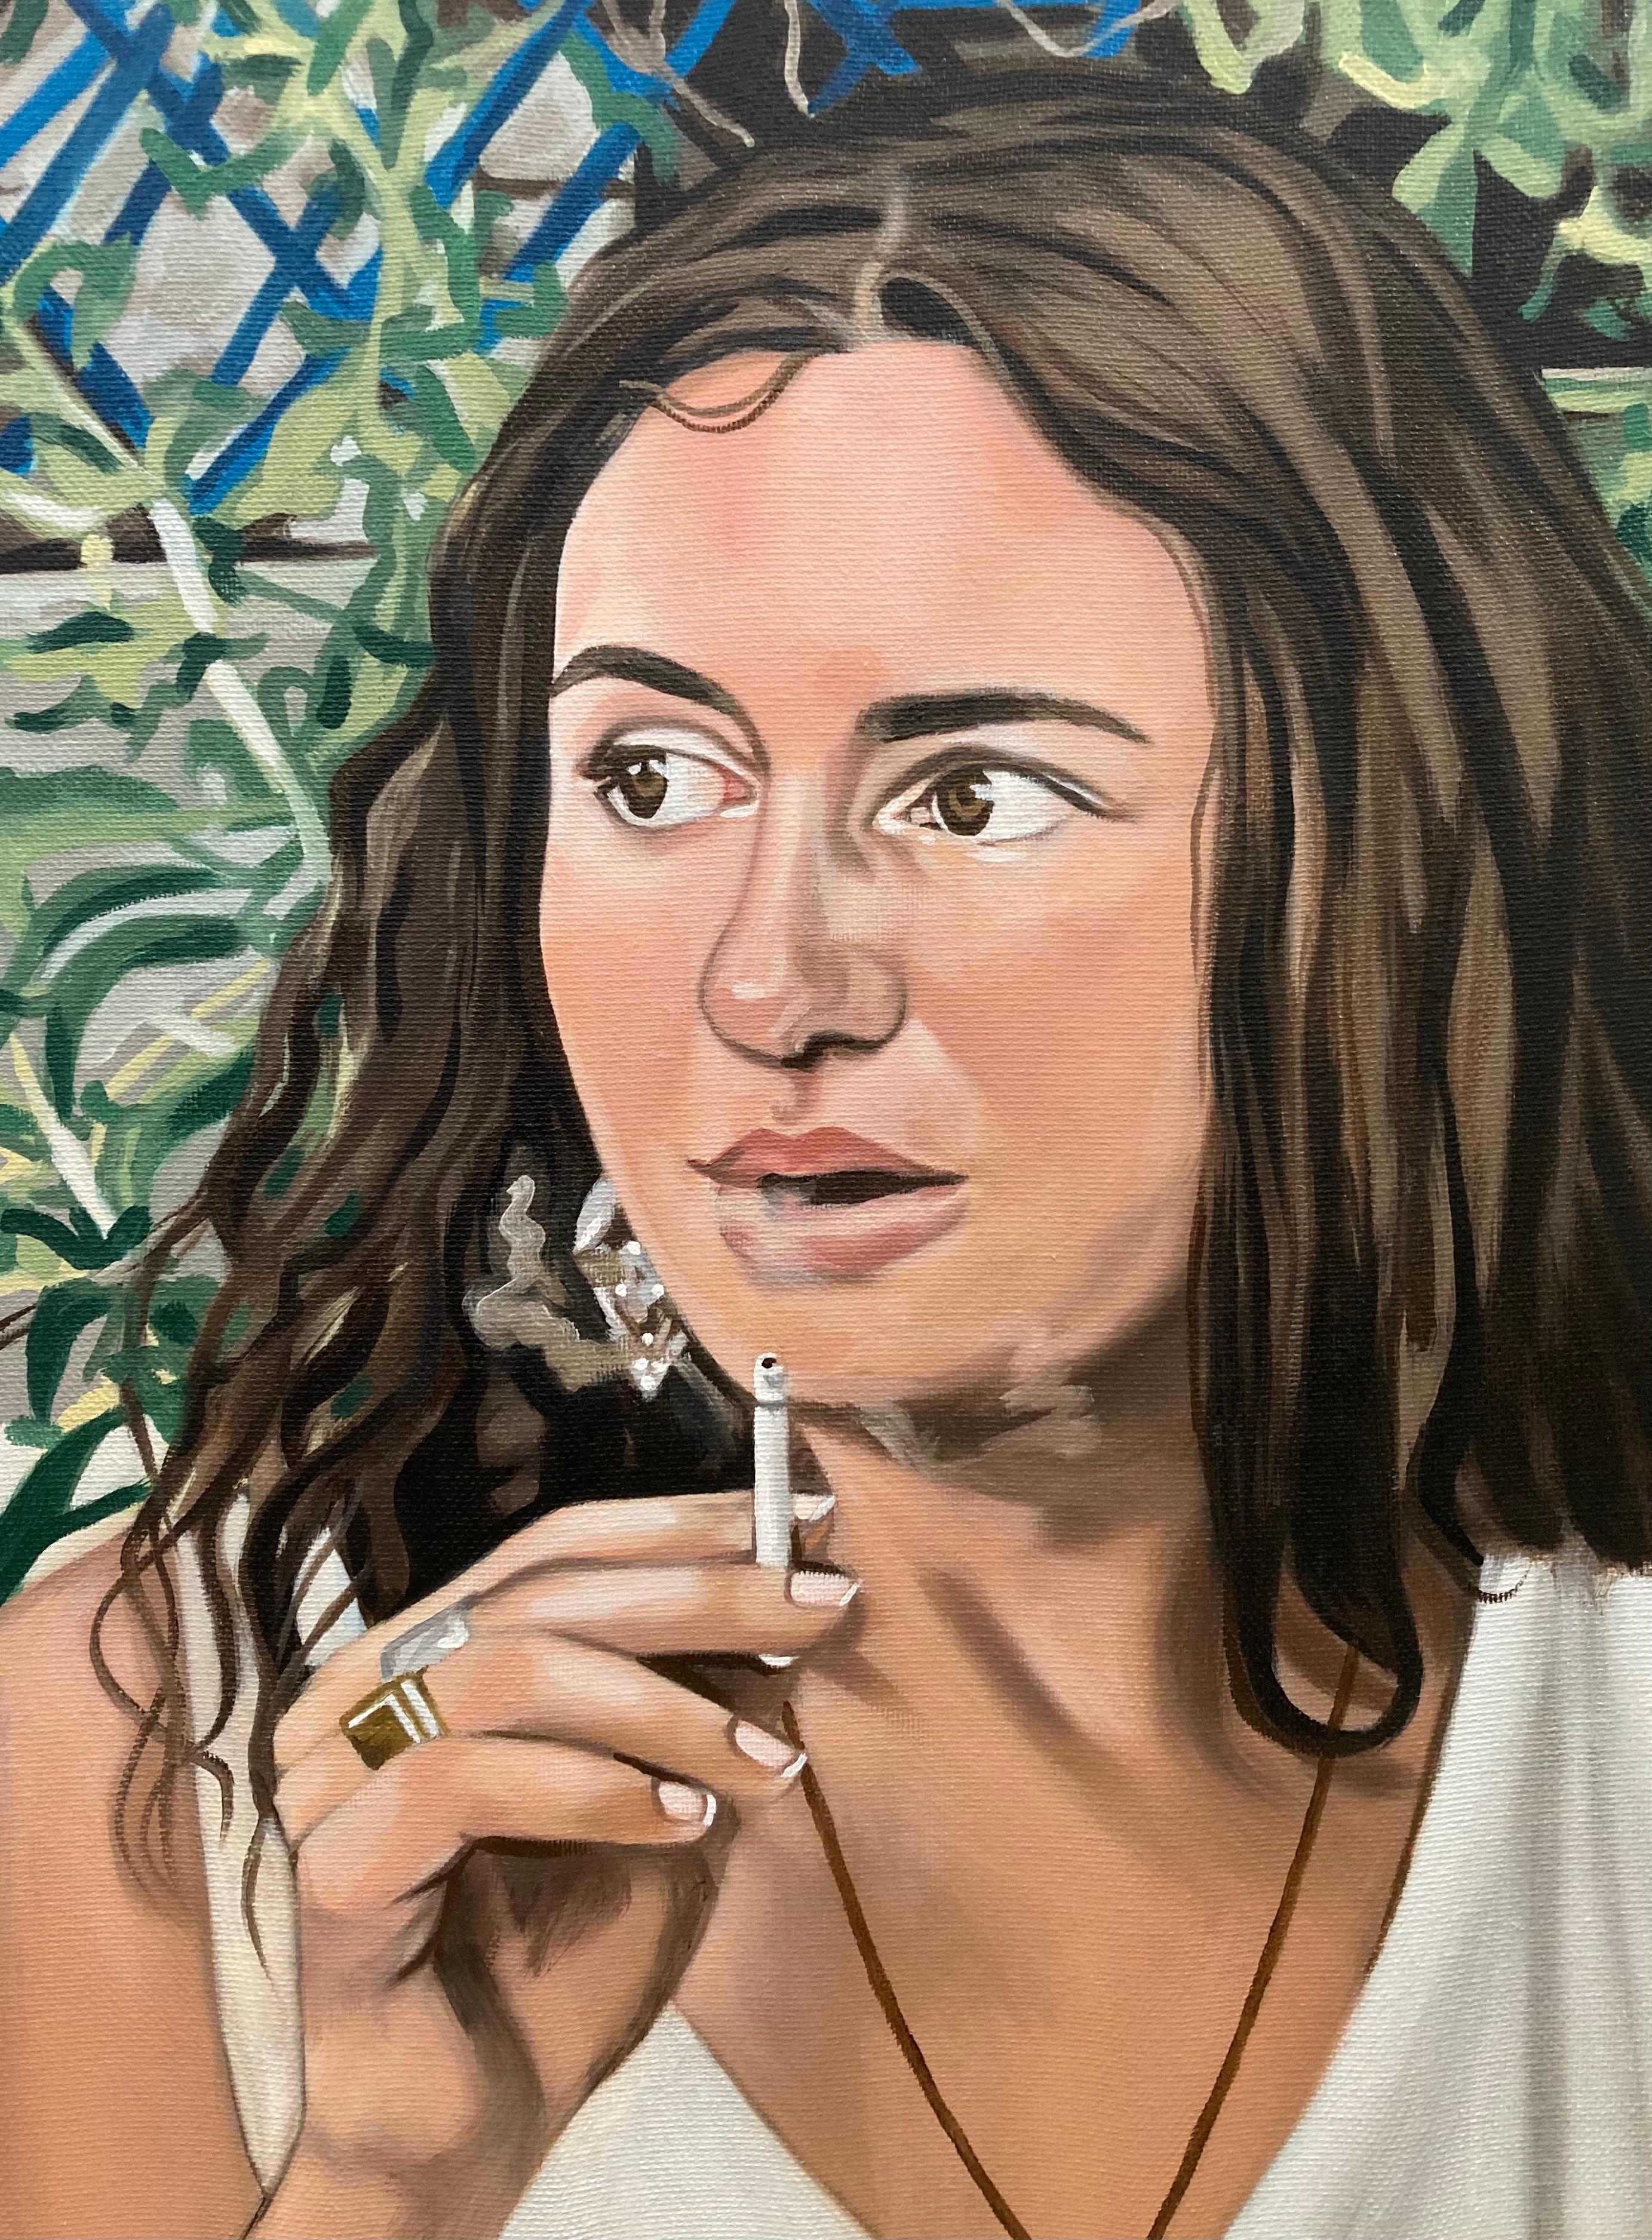 Nina Baxter Figurative Painting - Oil Painting on Canvas, Portrait Painting, Smoking Woman Painting